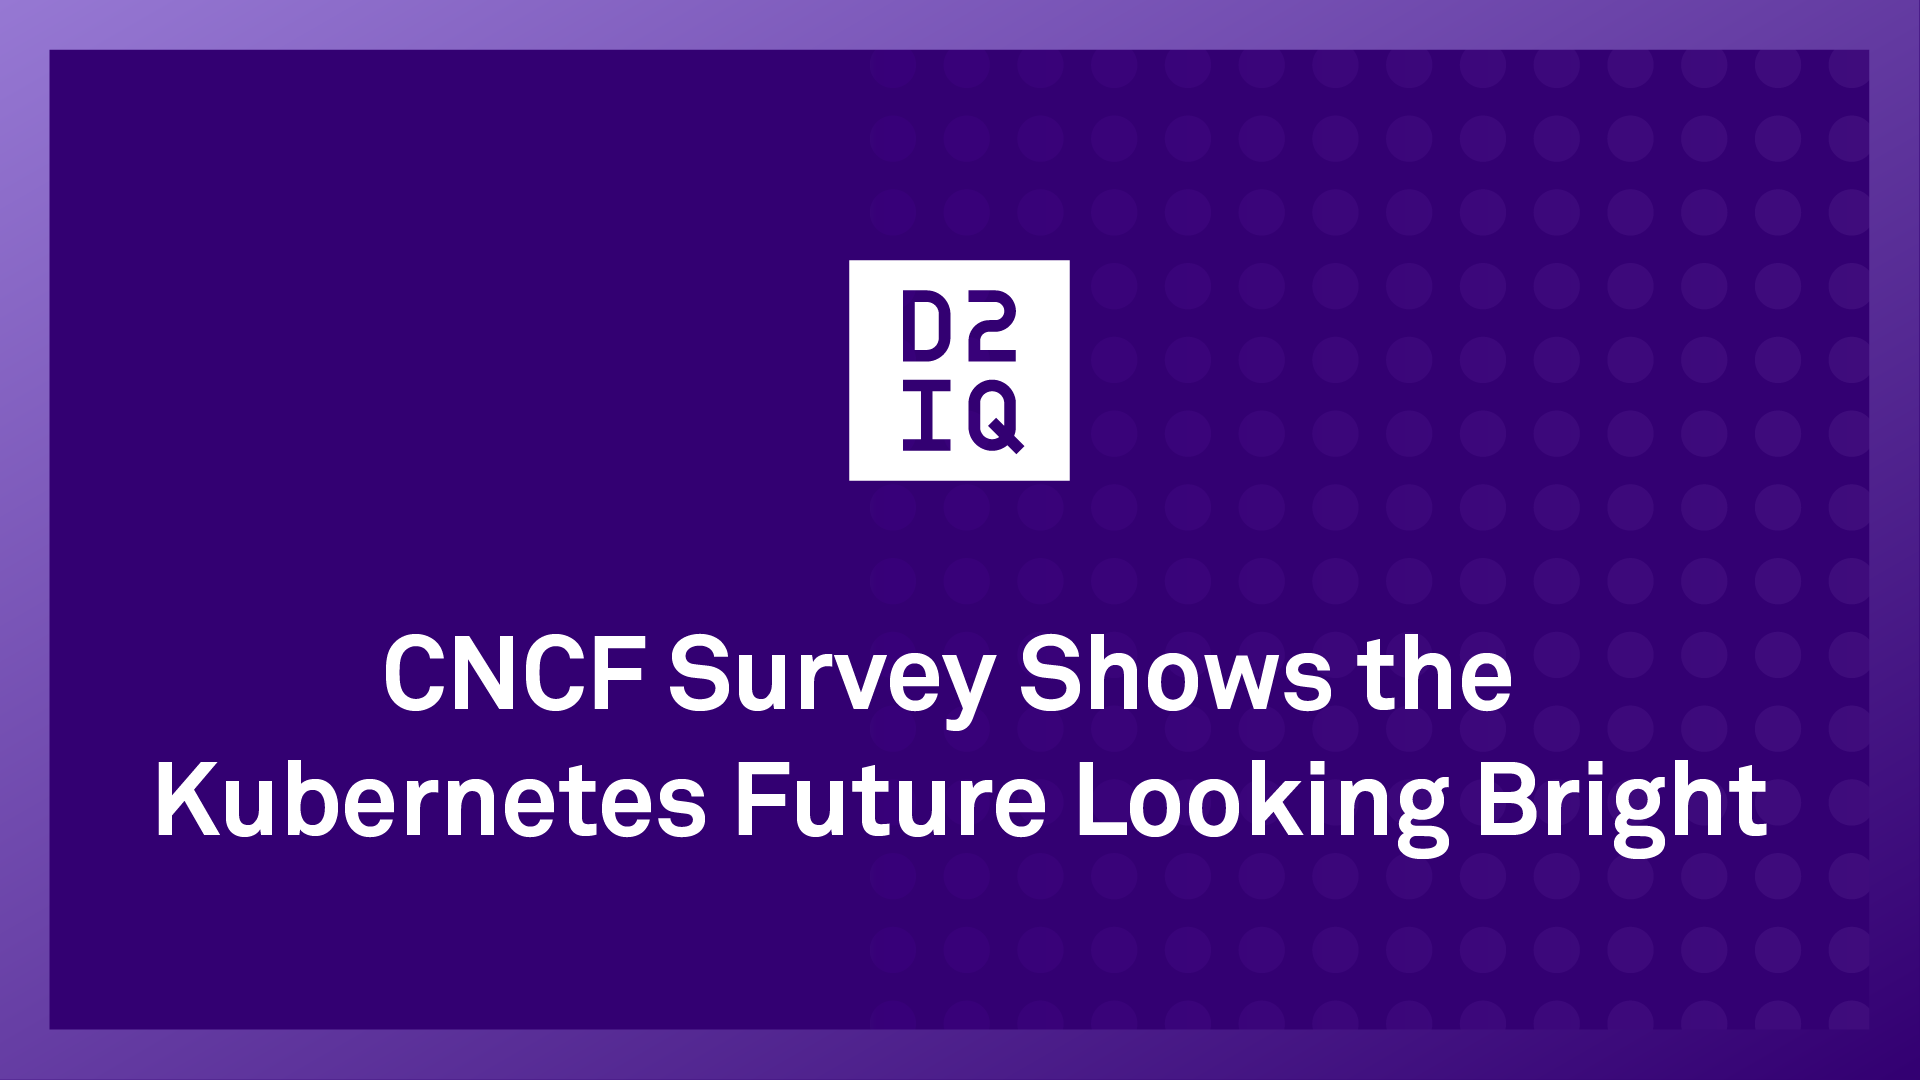 CNCF Survey Shows the Kubernetes Future Looking Bright